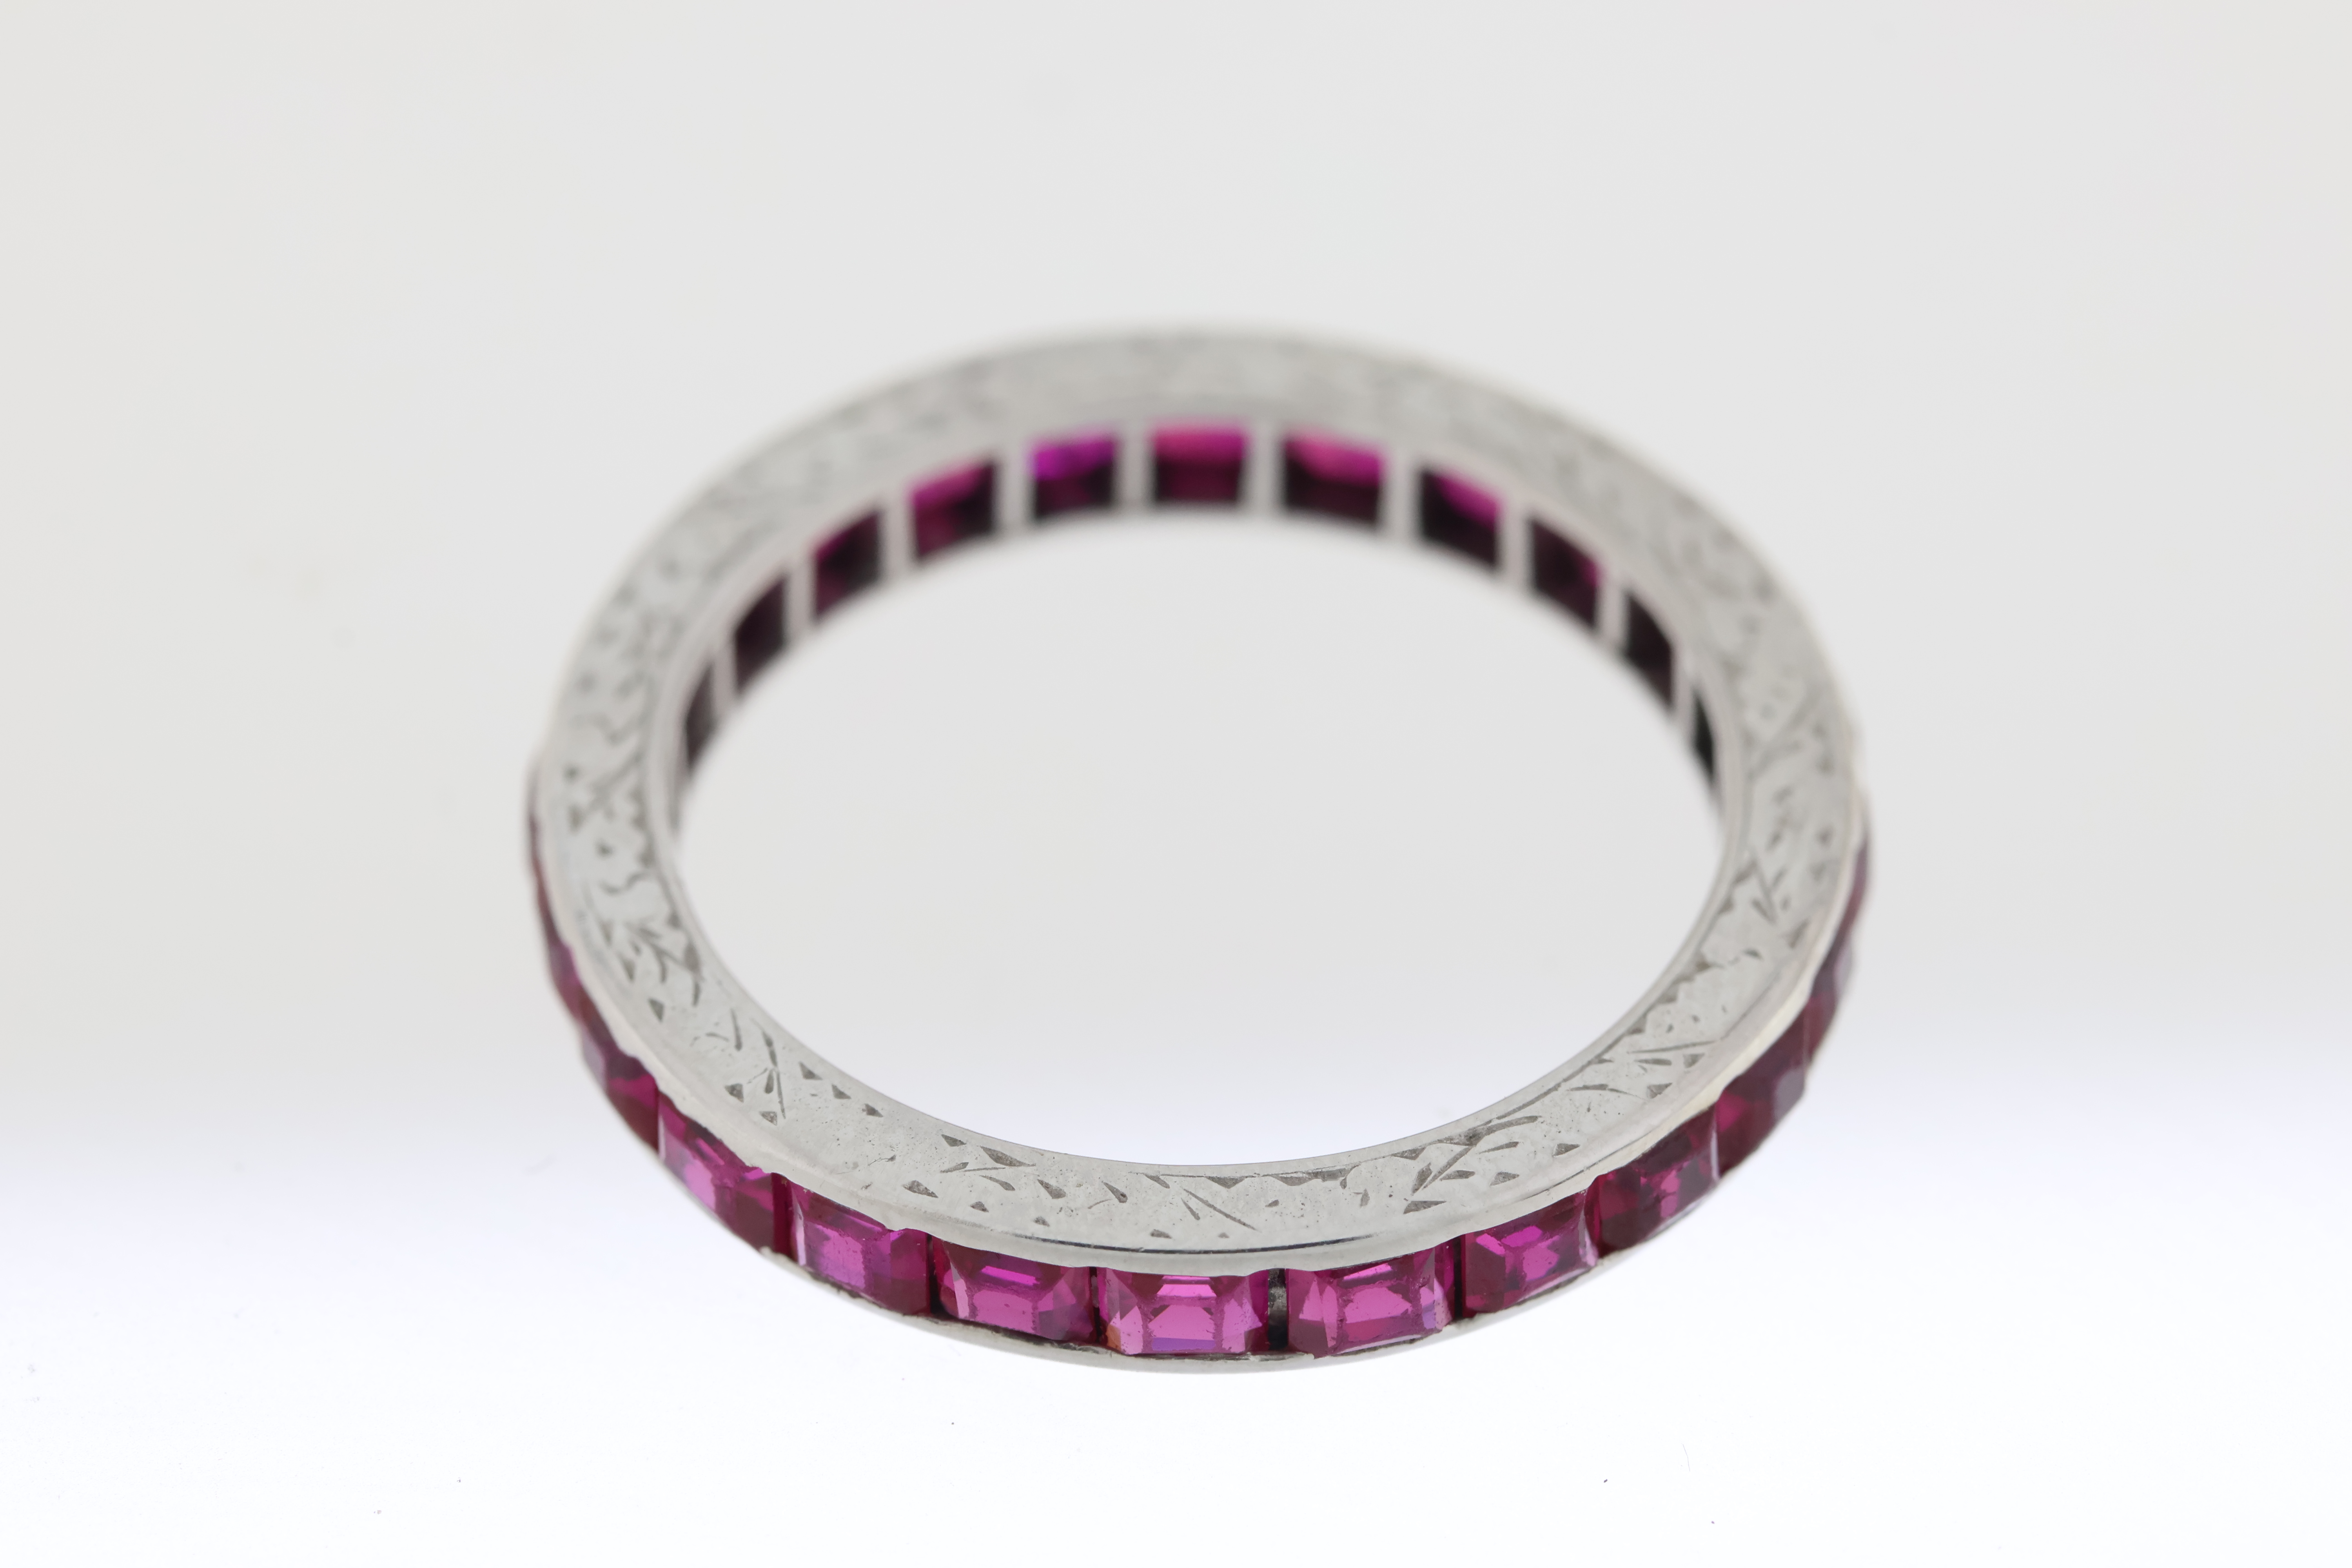 Vintage 18 carat white gold full eternity ring set with rubies, The sides are etched. - Image 4 of 4